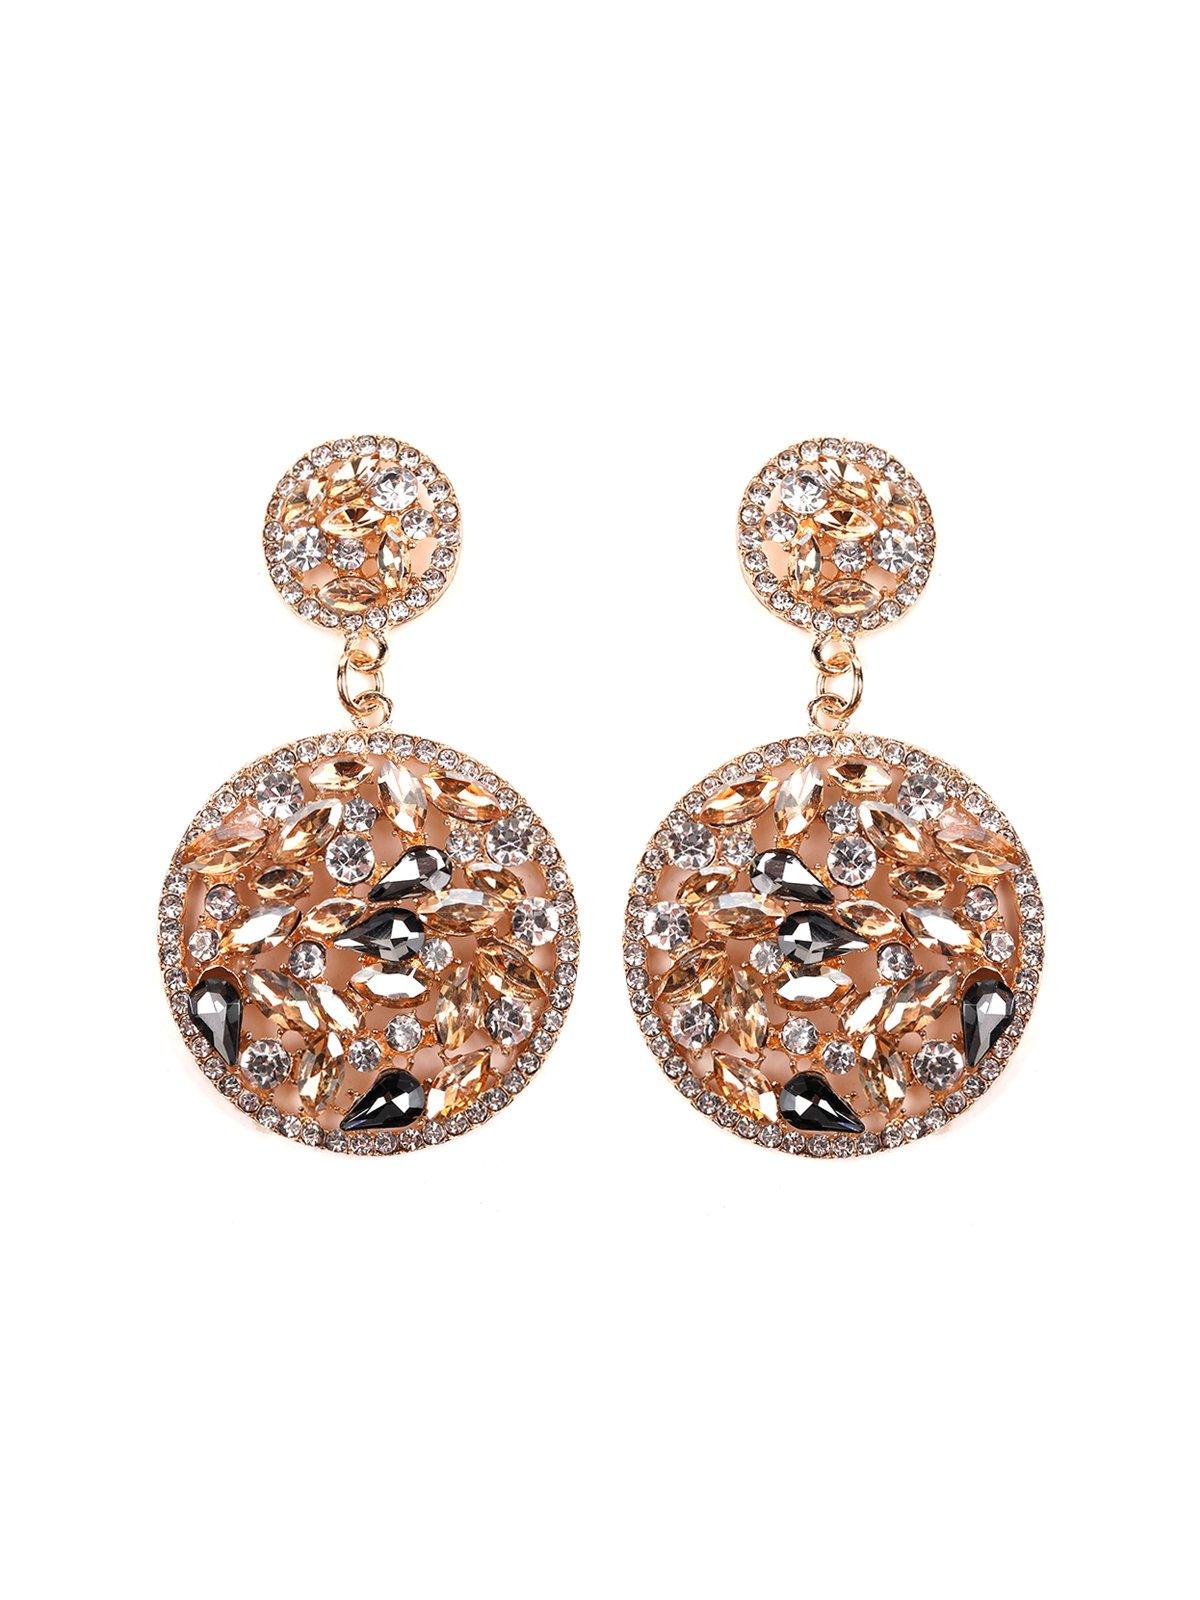 Women's Exquisite Double Rounded Crystal Earrings - Odette